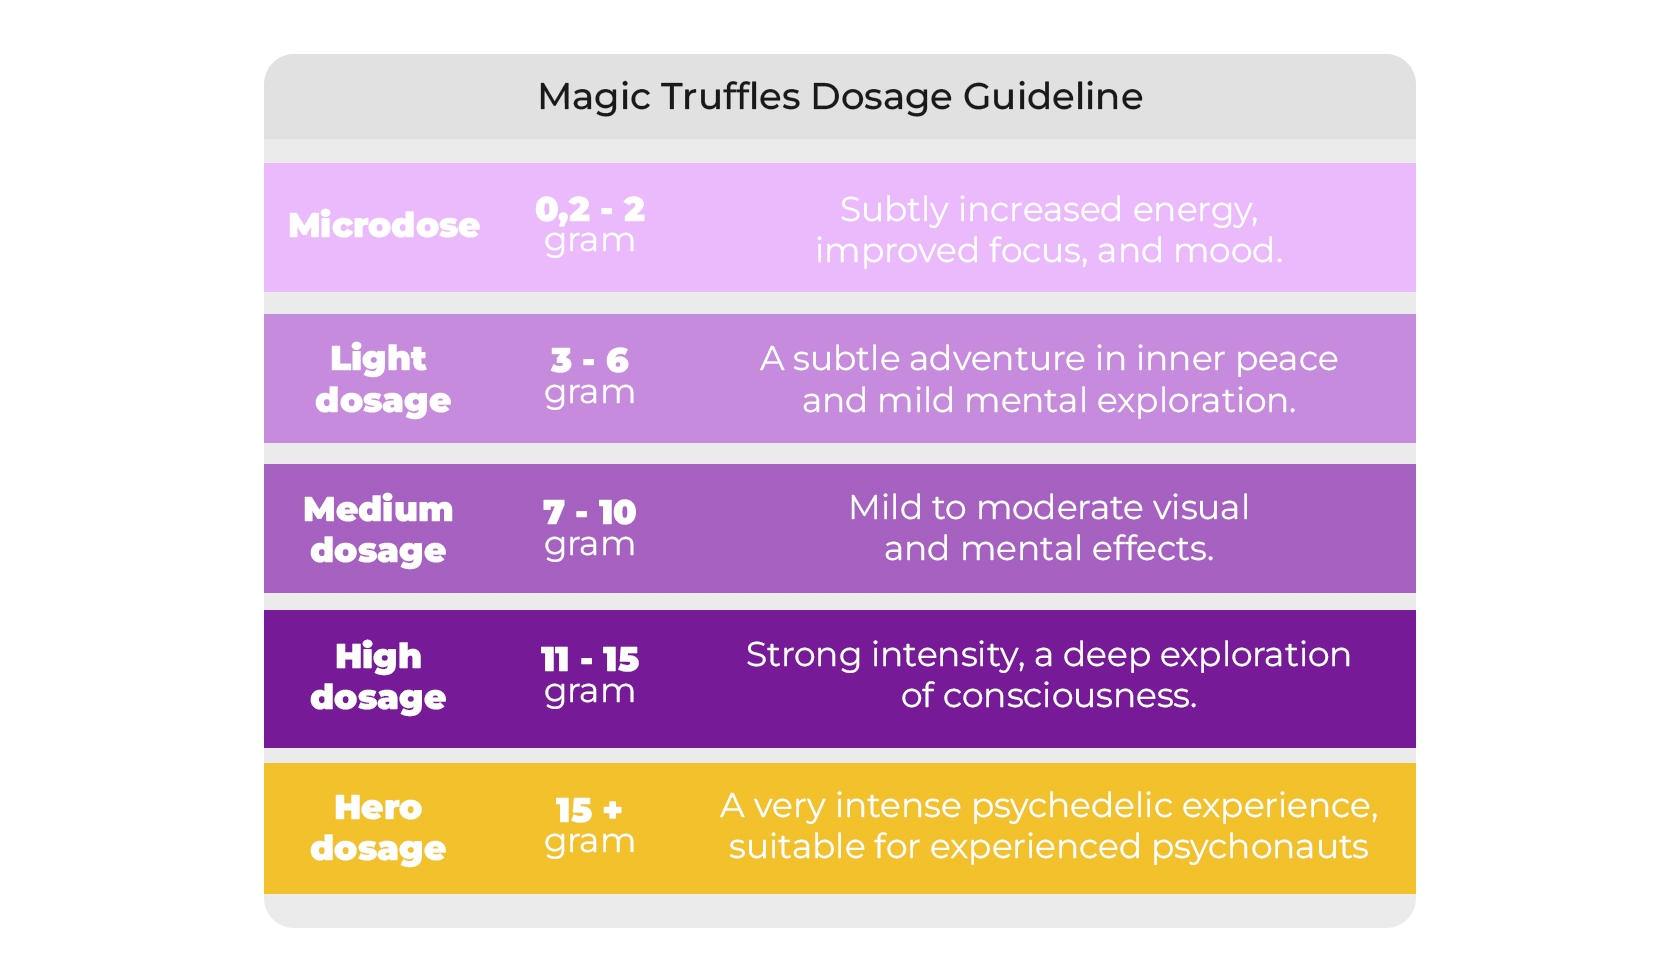 Magic Truffles Dosage Guideline - psychedelics